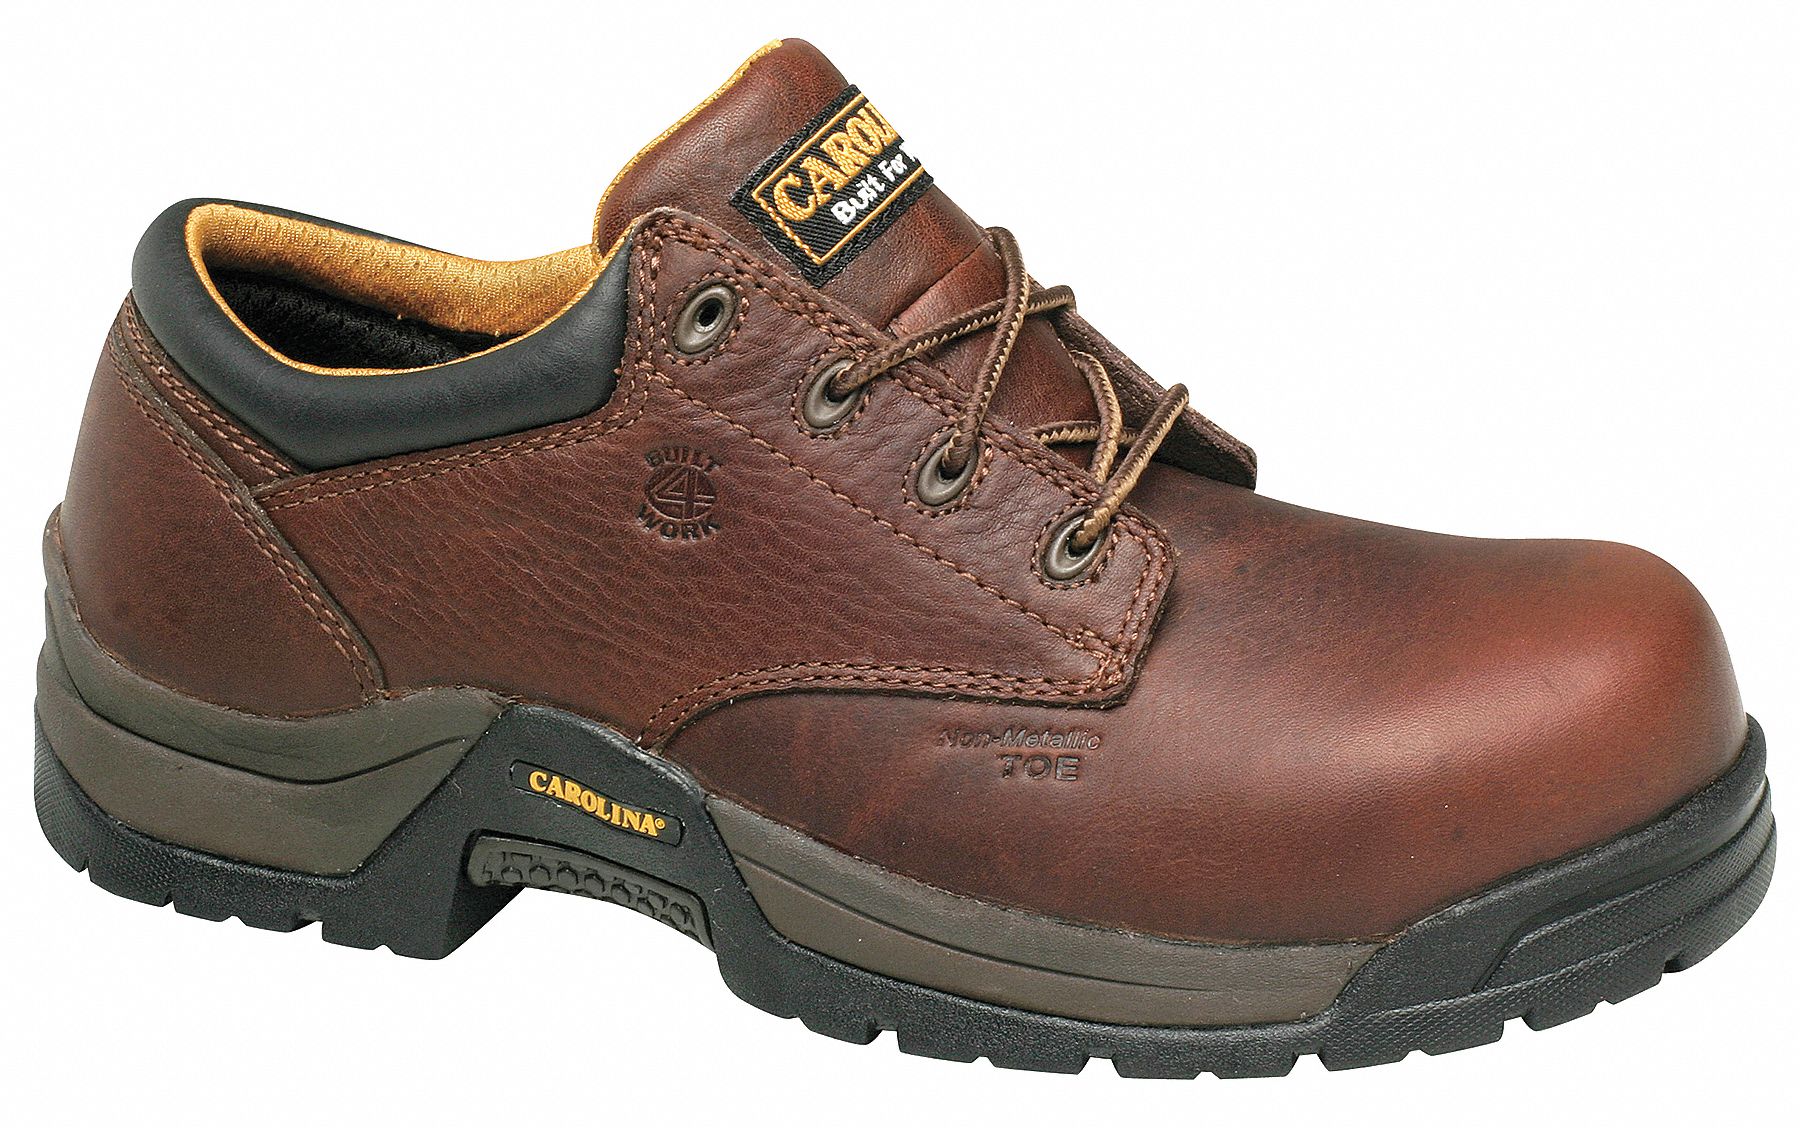 oxford work boot